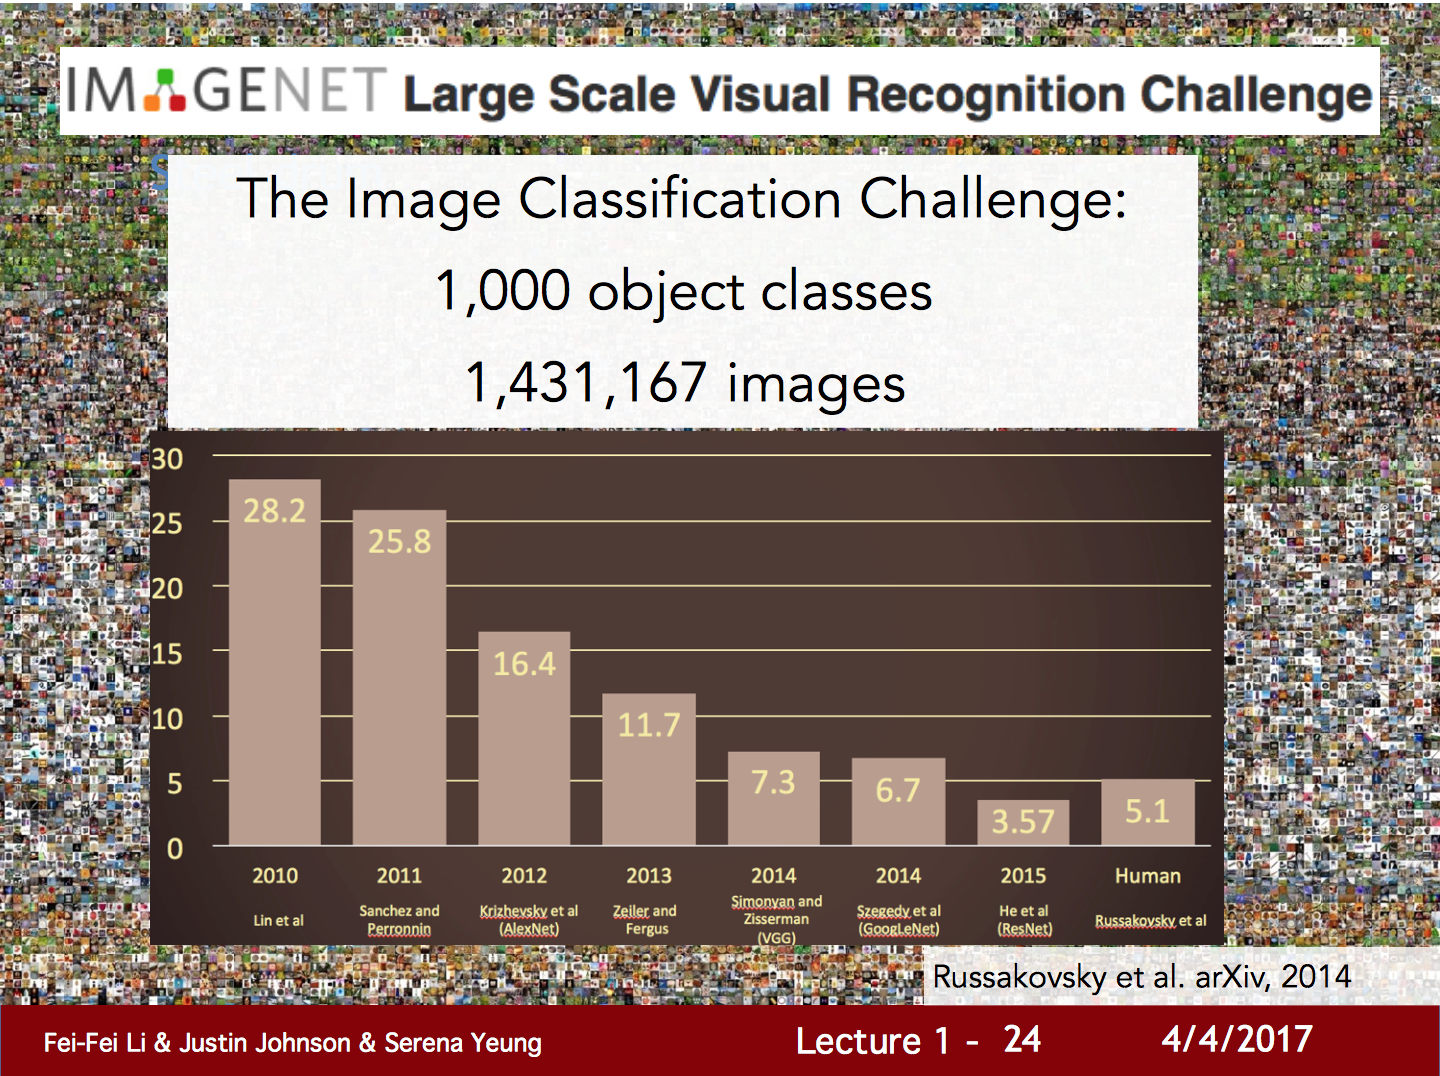 The Image Classification Challenge